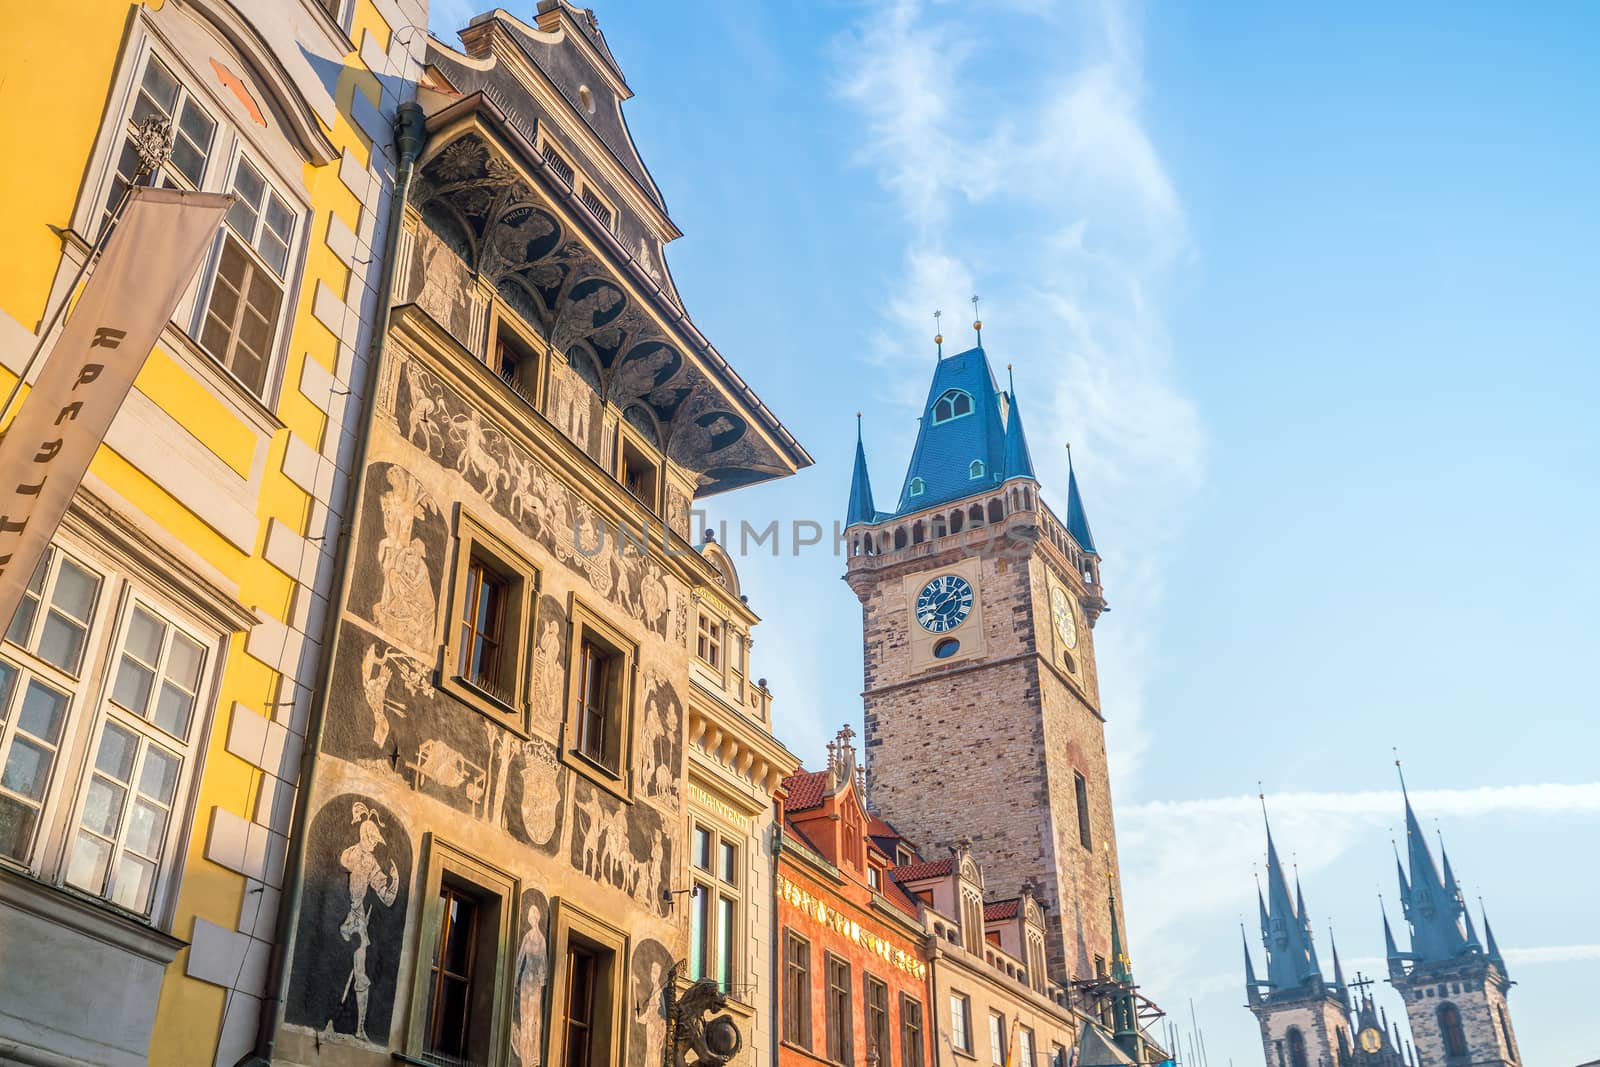 Heritage buildings in Old Town of Prague in Czech Republic by f11photo